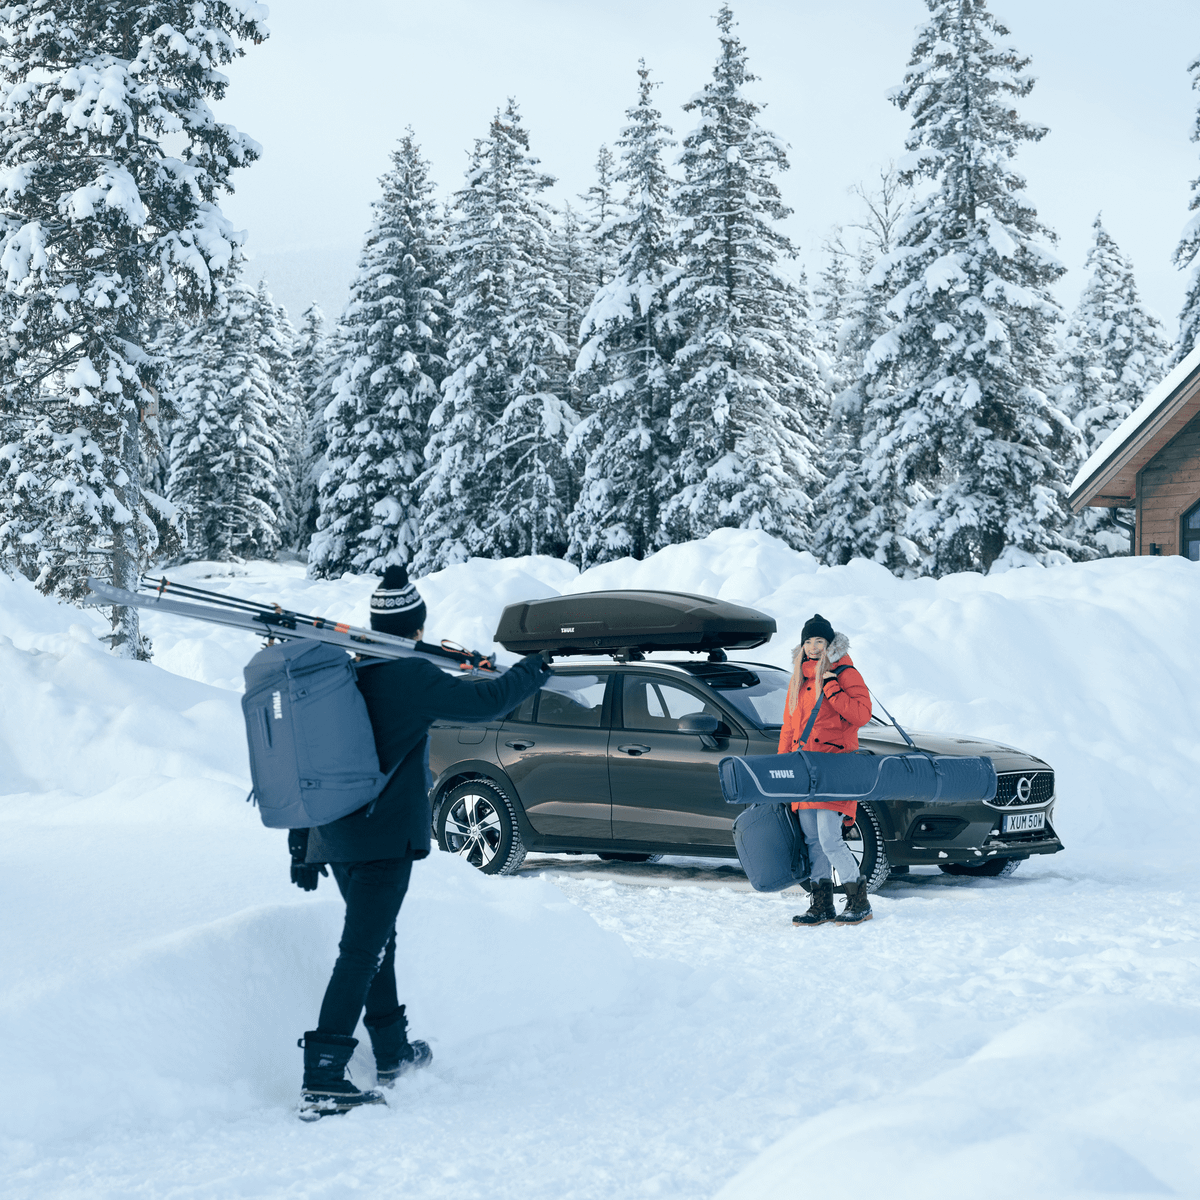 A woman stands by a car in the snow saying hi to a man carrying skis and a Thule RoundTrip 60L Ski Backpack.